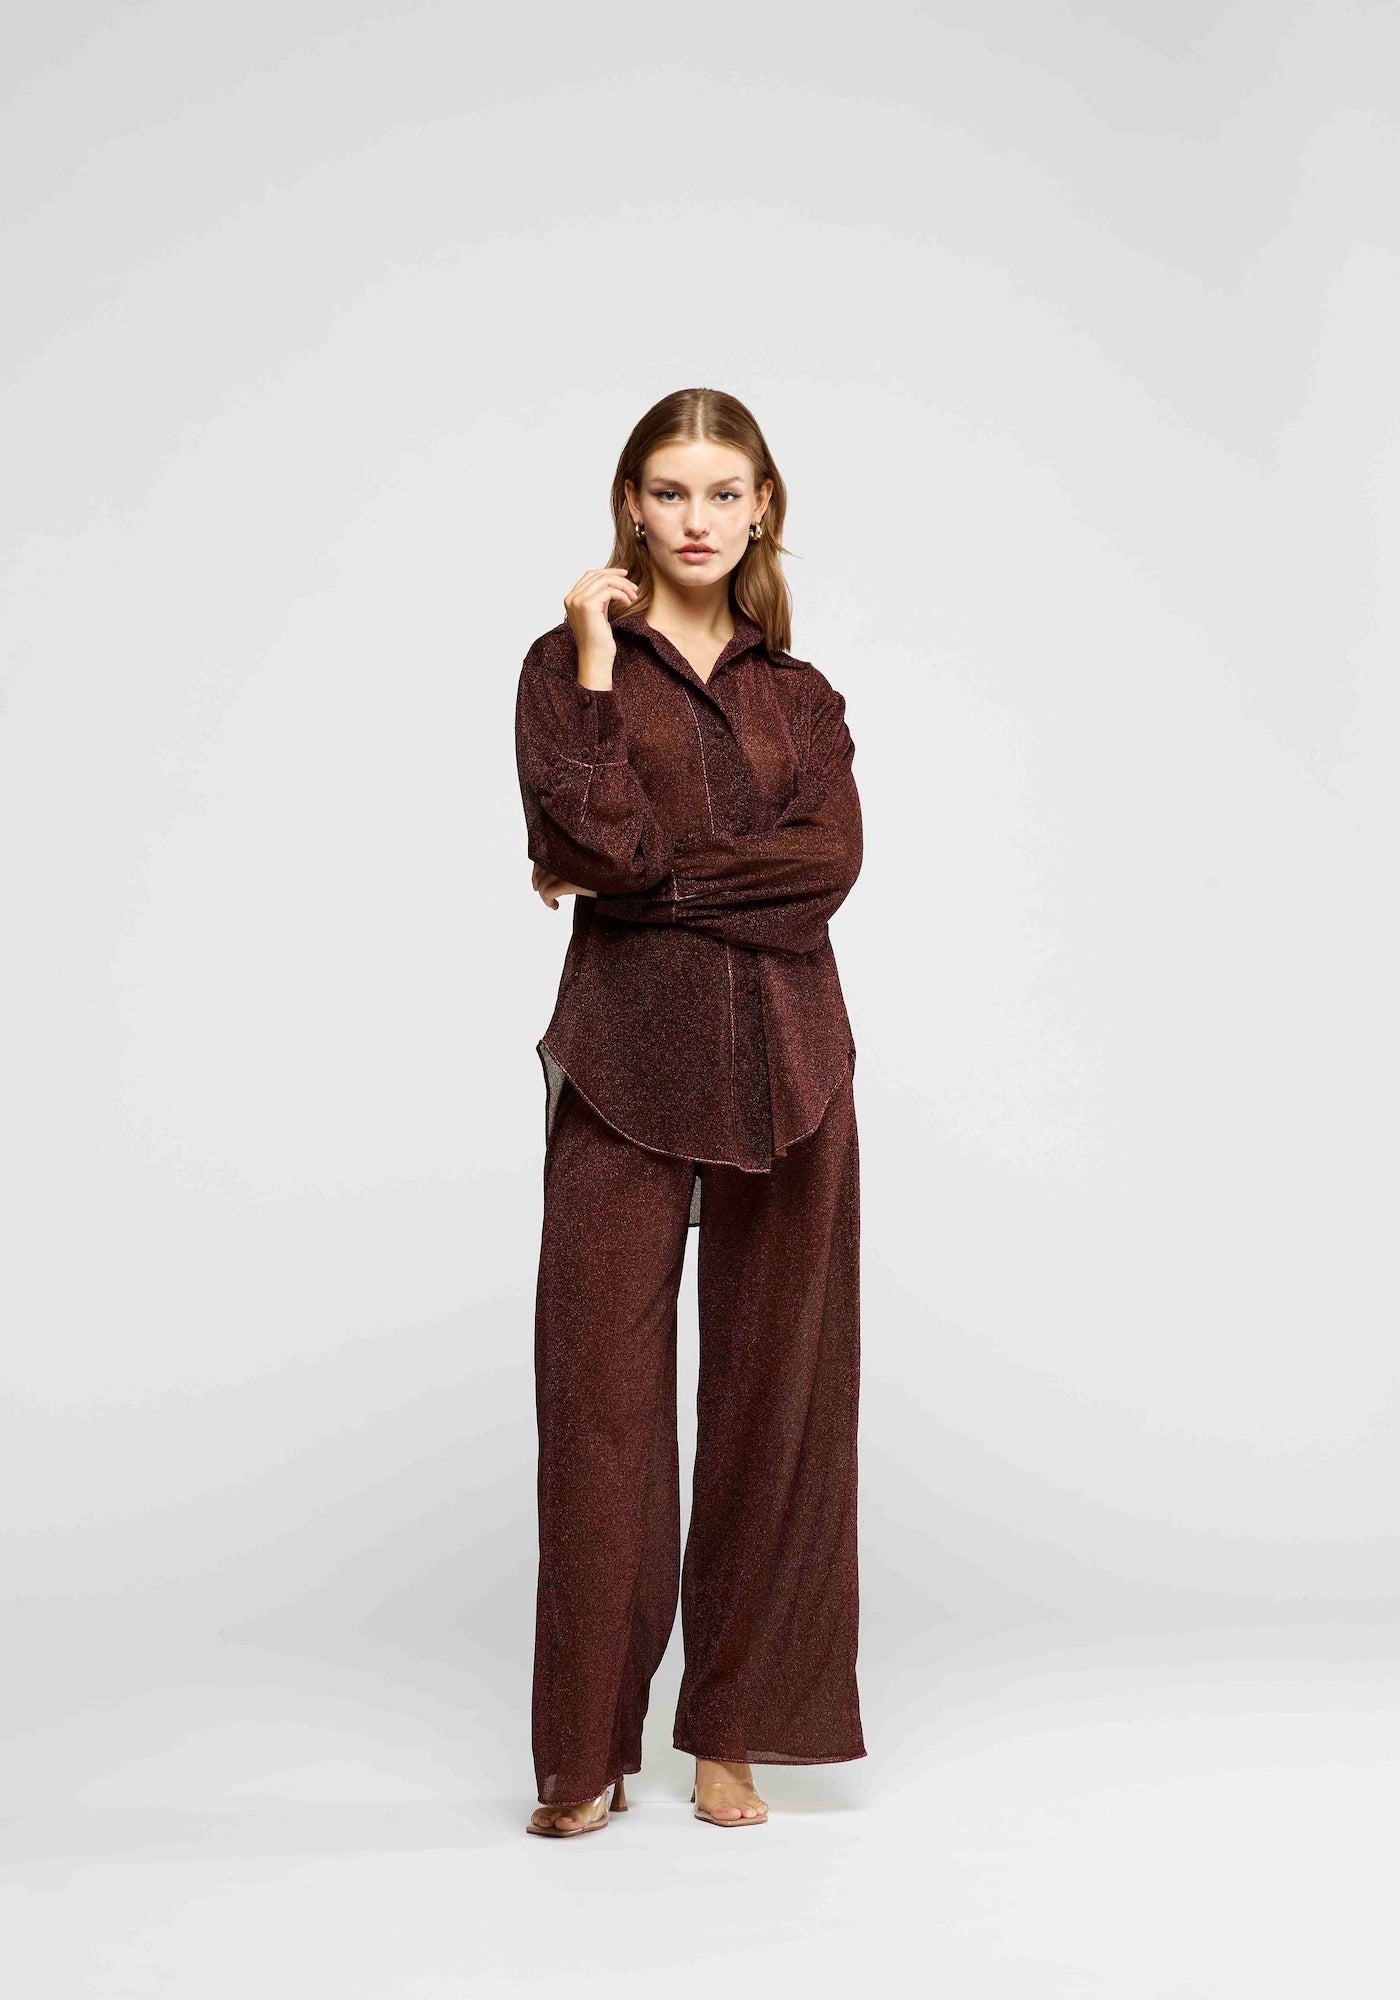 LUMIERE LONG SHIRT IN CHOCOLATE